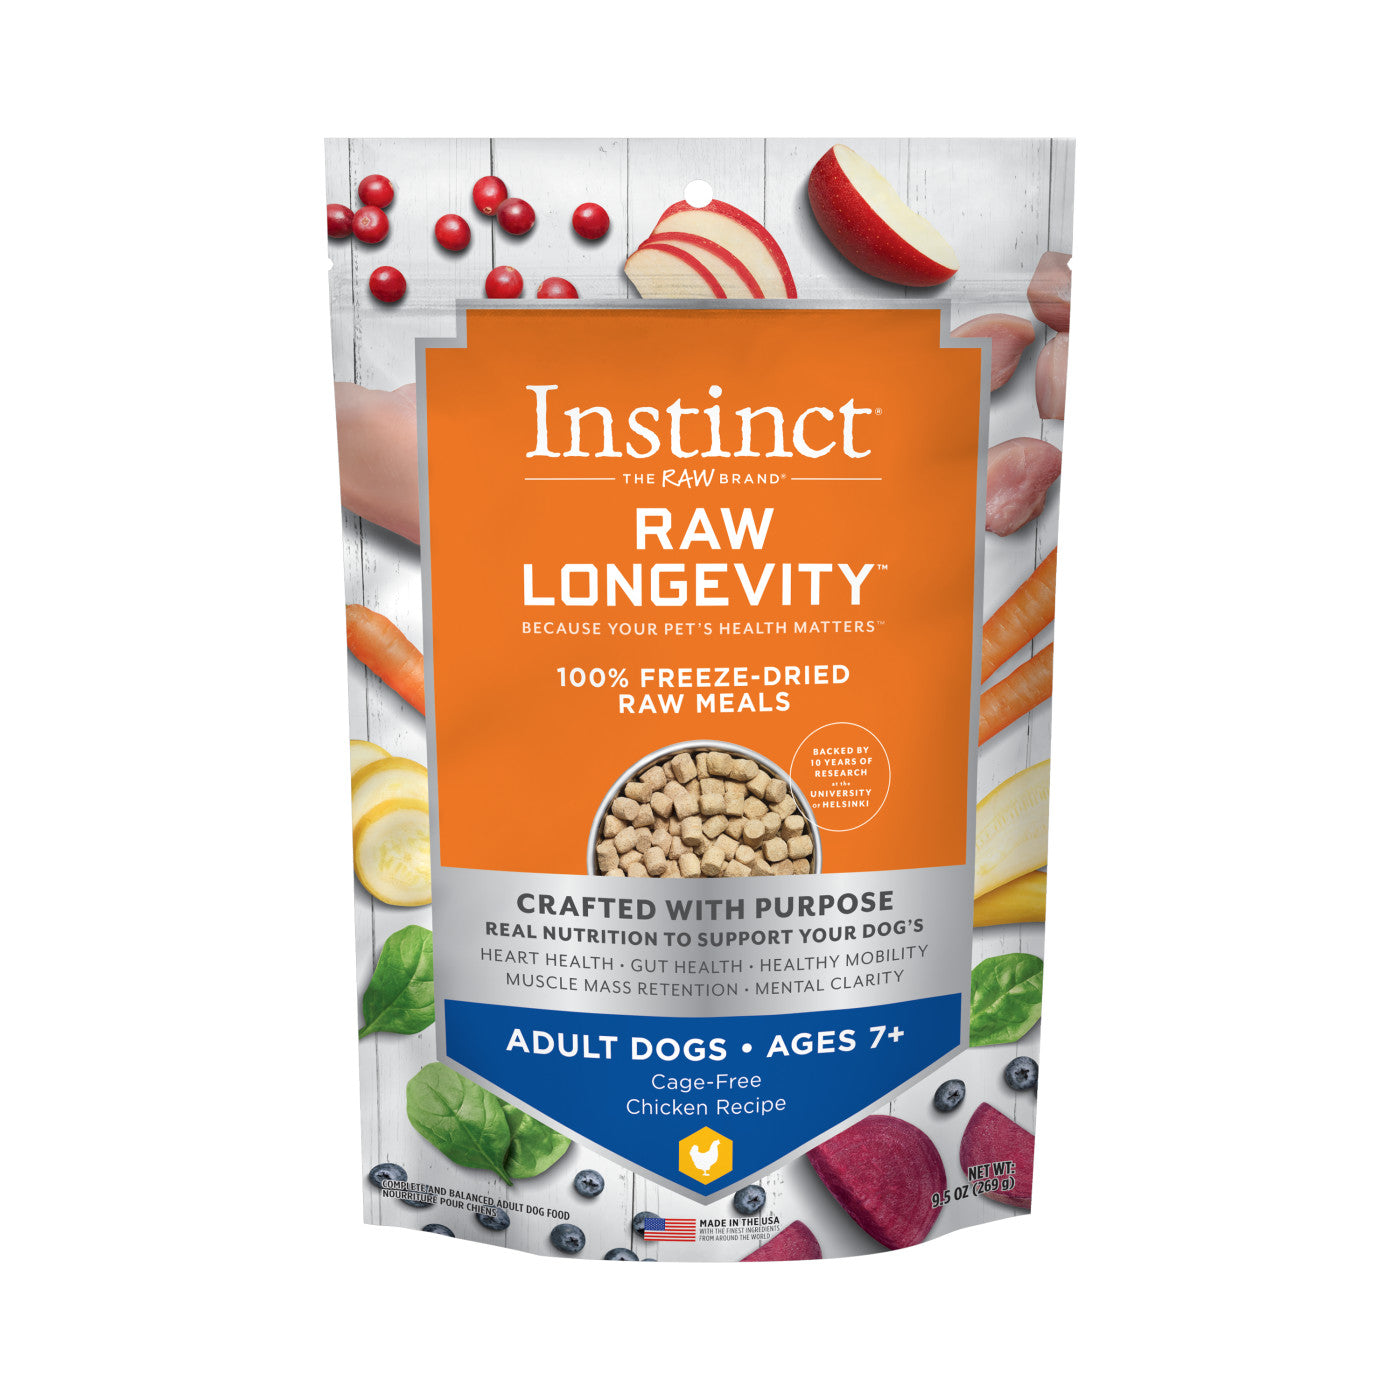 INSTINCT® DOG FOOD RAW LONGEVITY 100% FREEZE-DRIED RAW MEALS CAGE-FREE CHICKEN RECIPE FOR ADULTS 7+